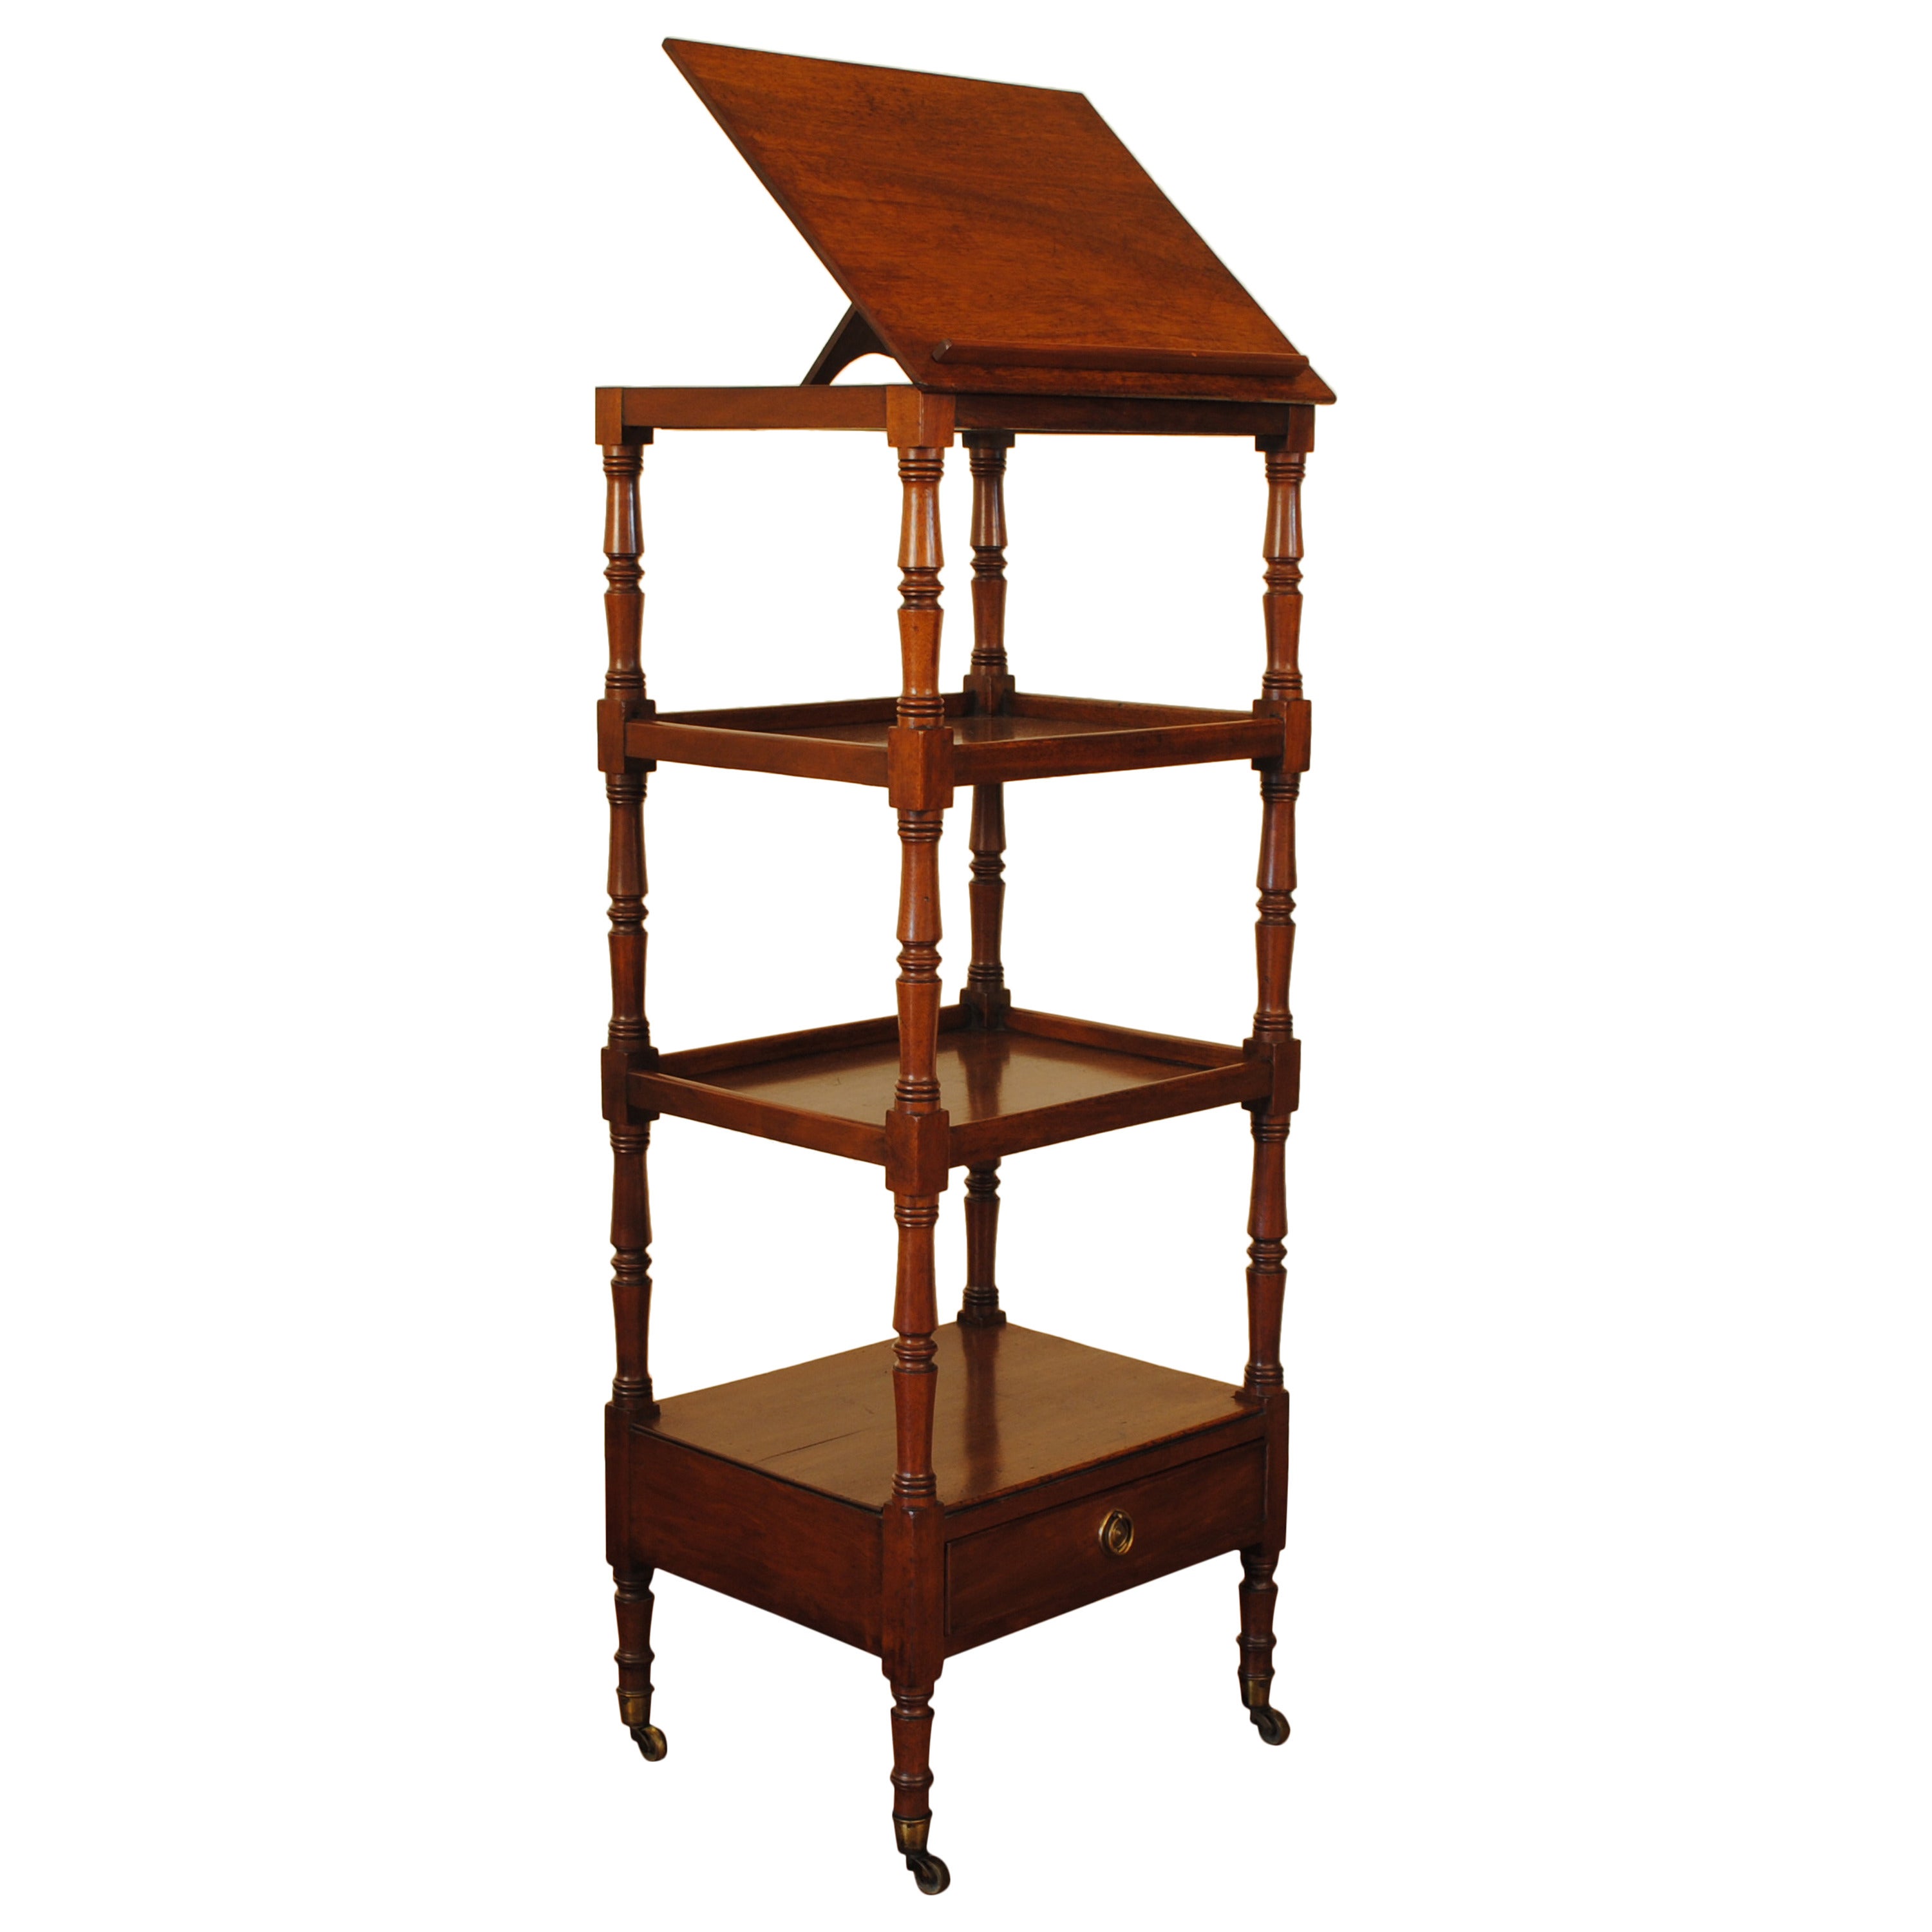 French, Late Louis Philippe, Walnut Four-Tiered Etagere, Mid-19th Century